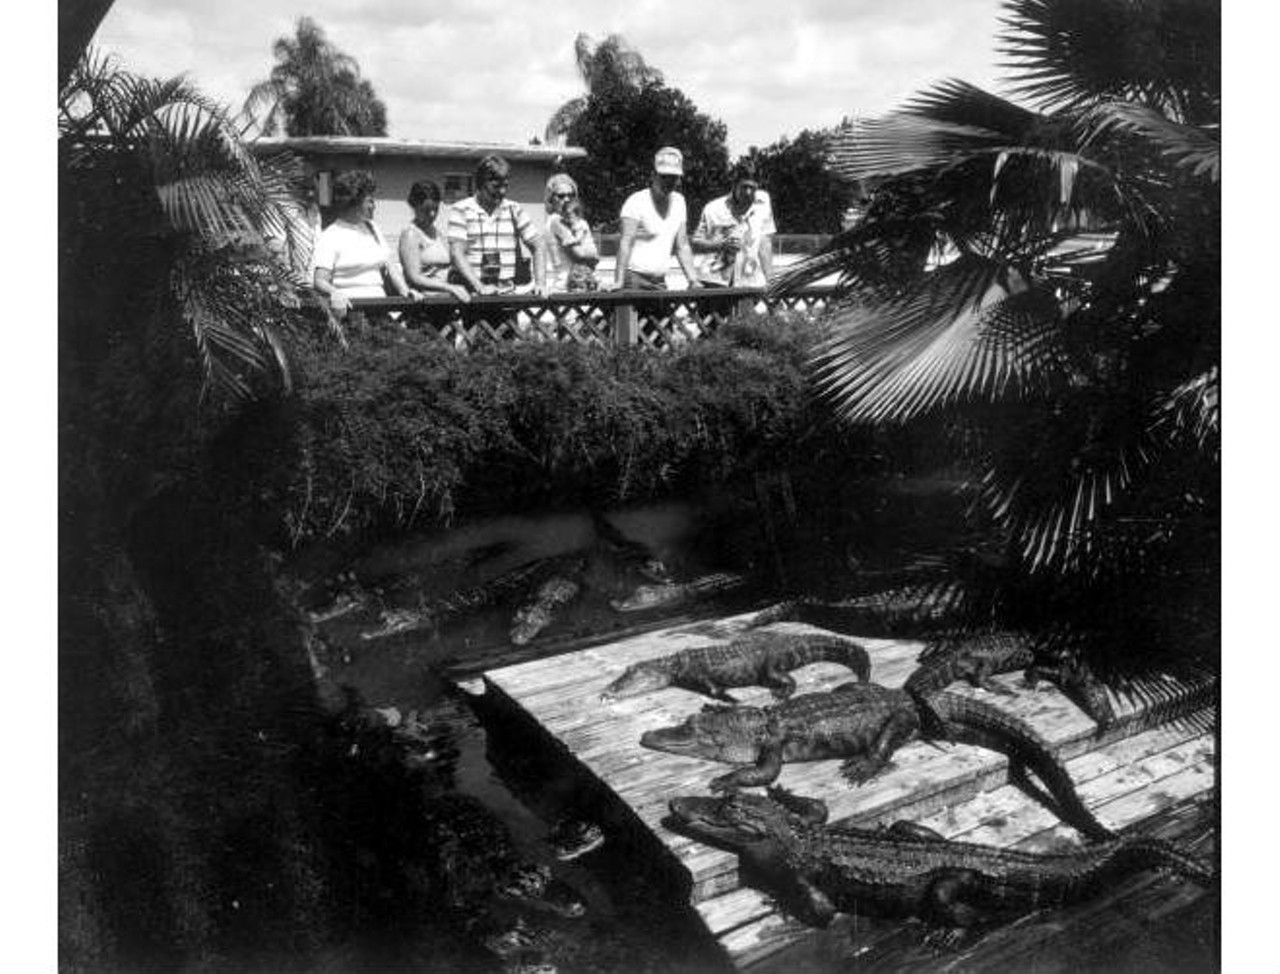 Tourists observing alligators at the Gatorland.State Archives of Florida, Florida Memory